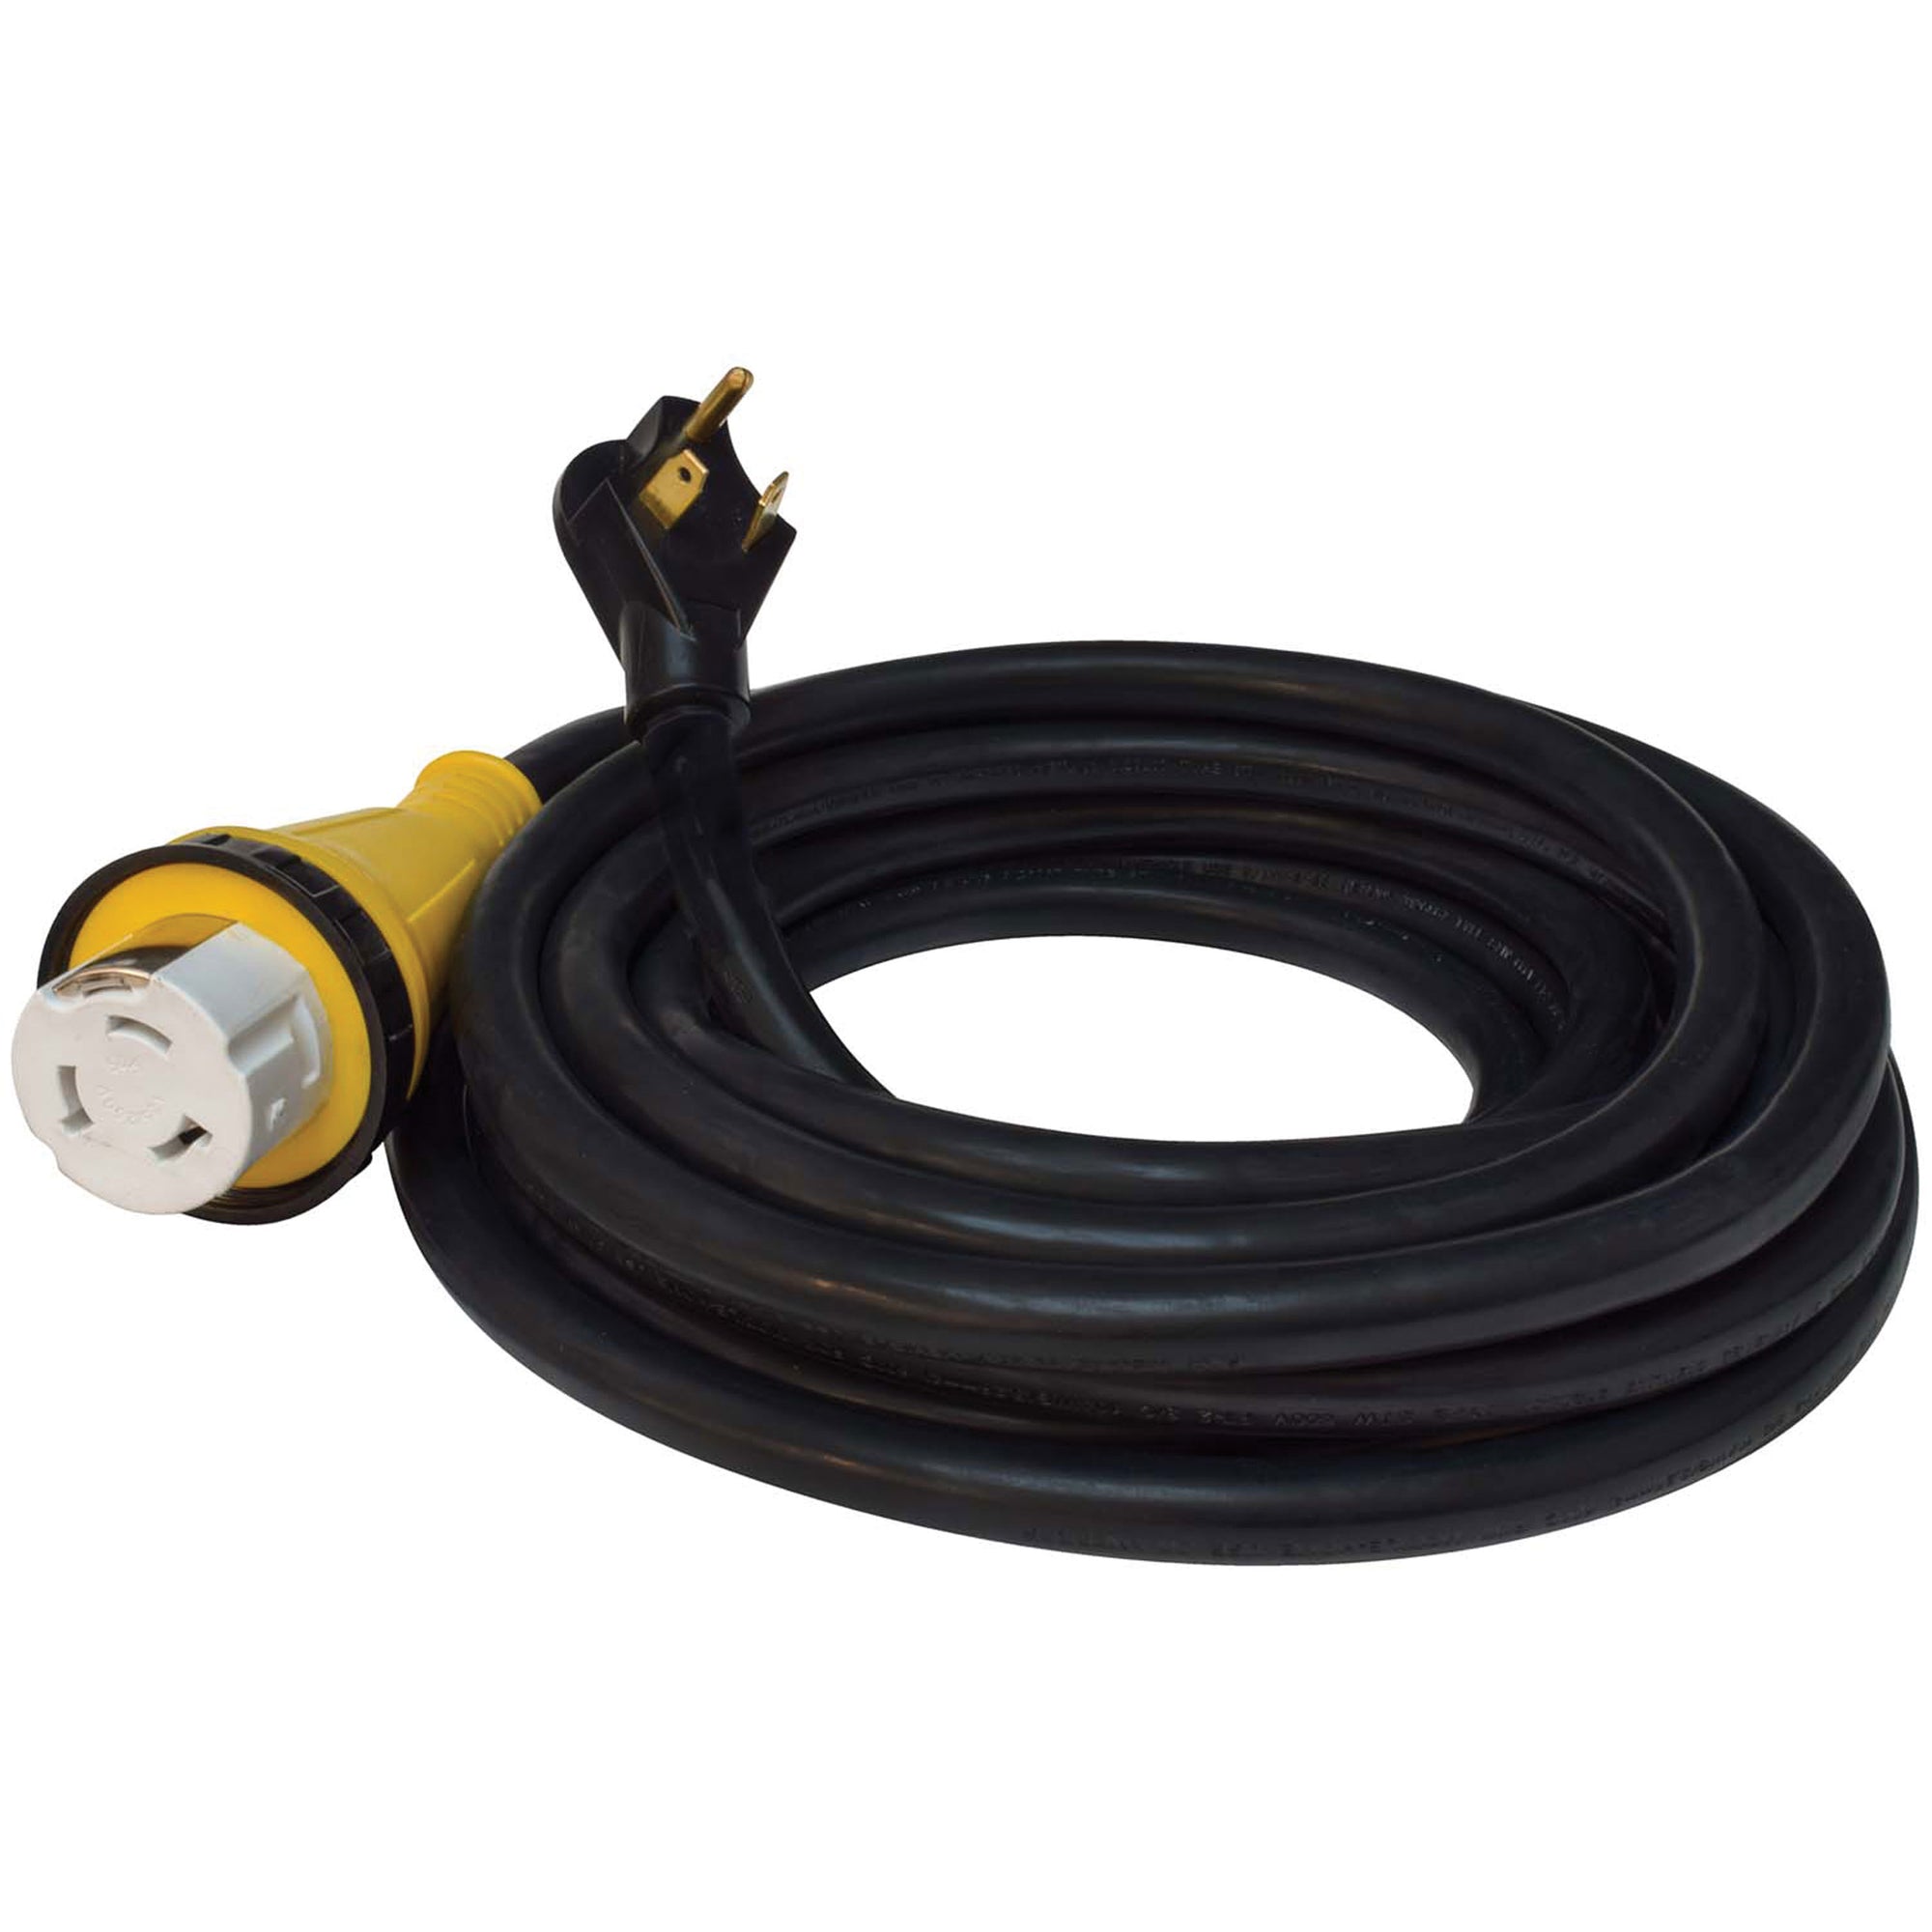 Valterra A10-3050EDBK Mighty Cord Detachable 25" Adapter Cord - 30AM to 50AF, Black